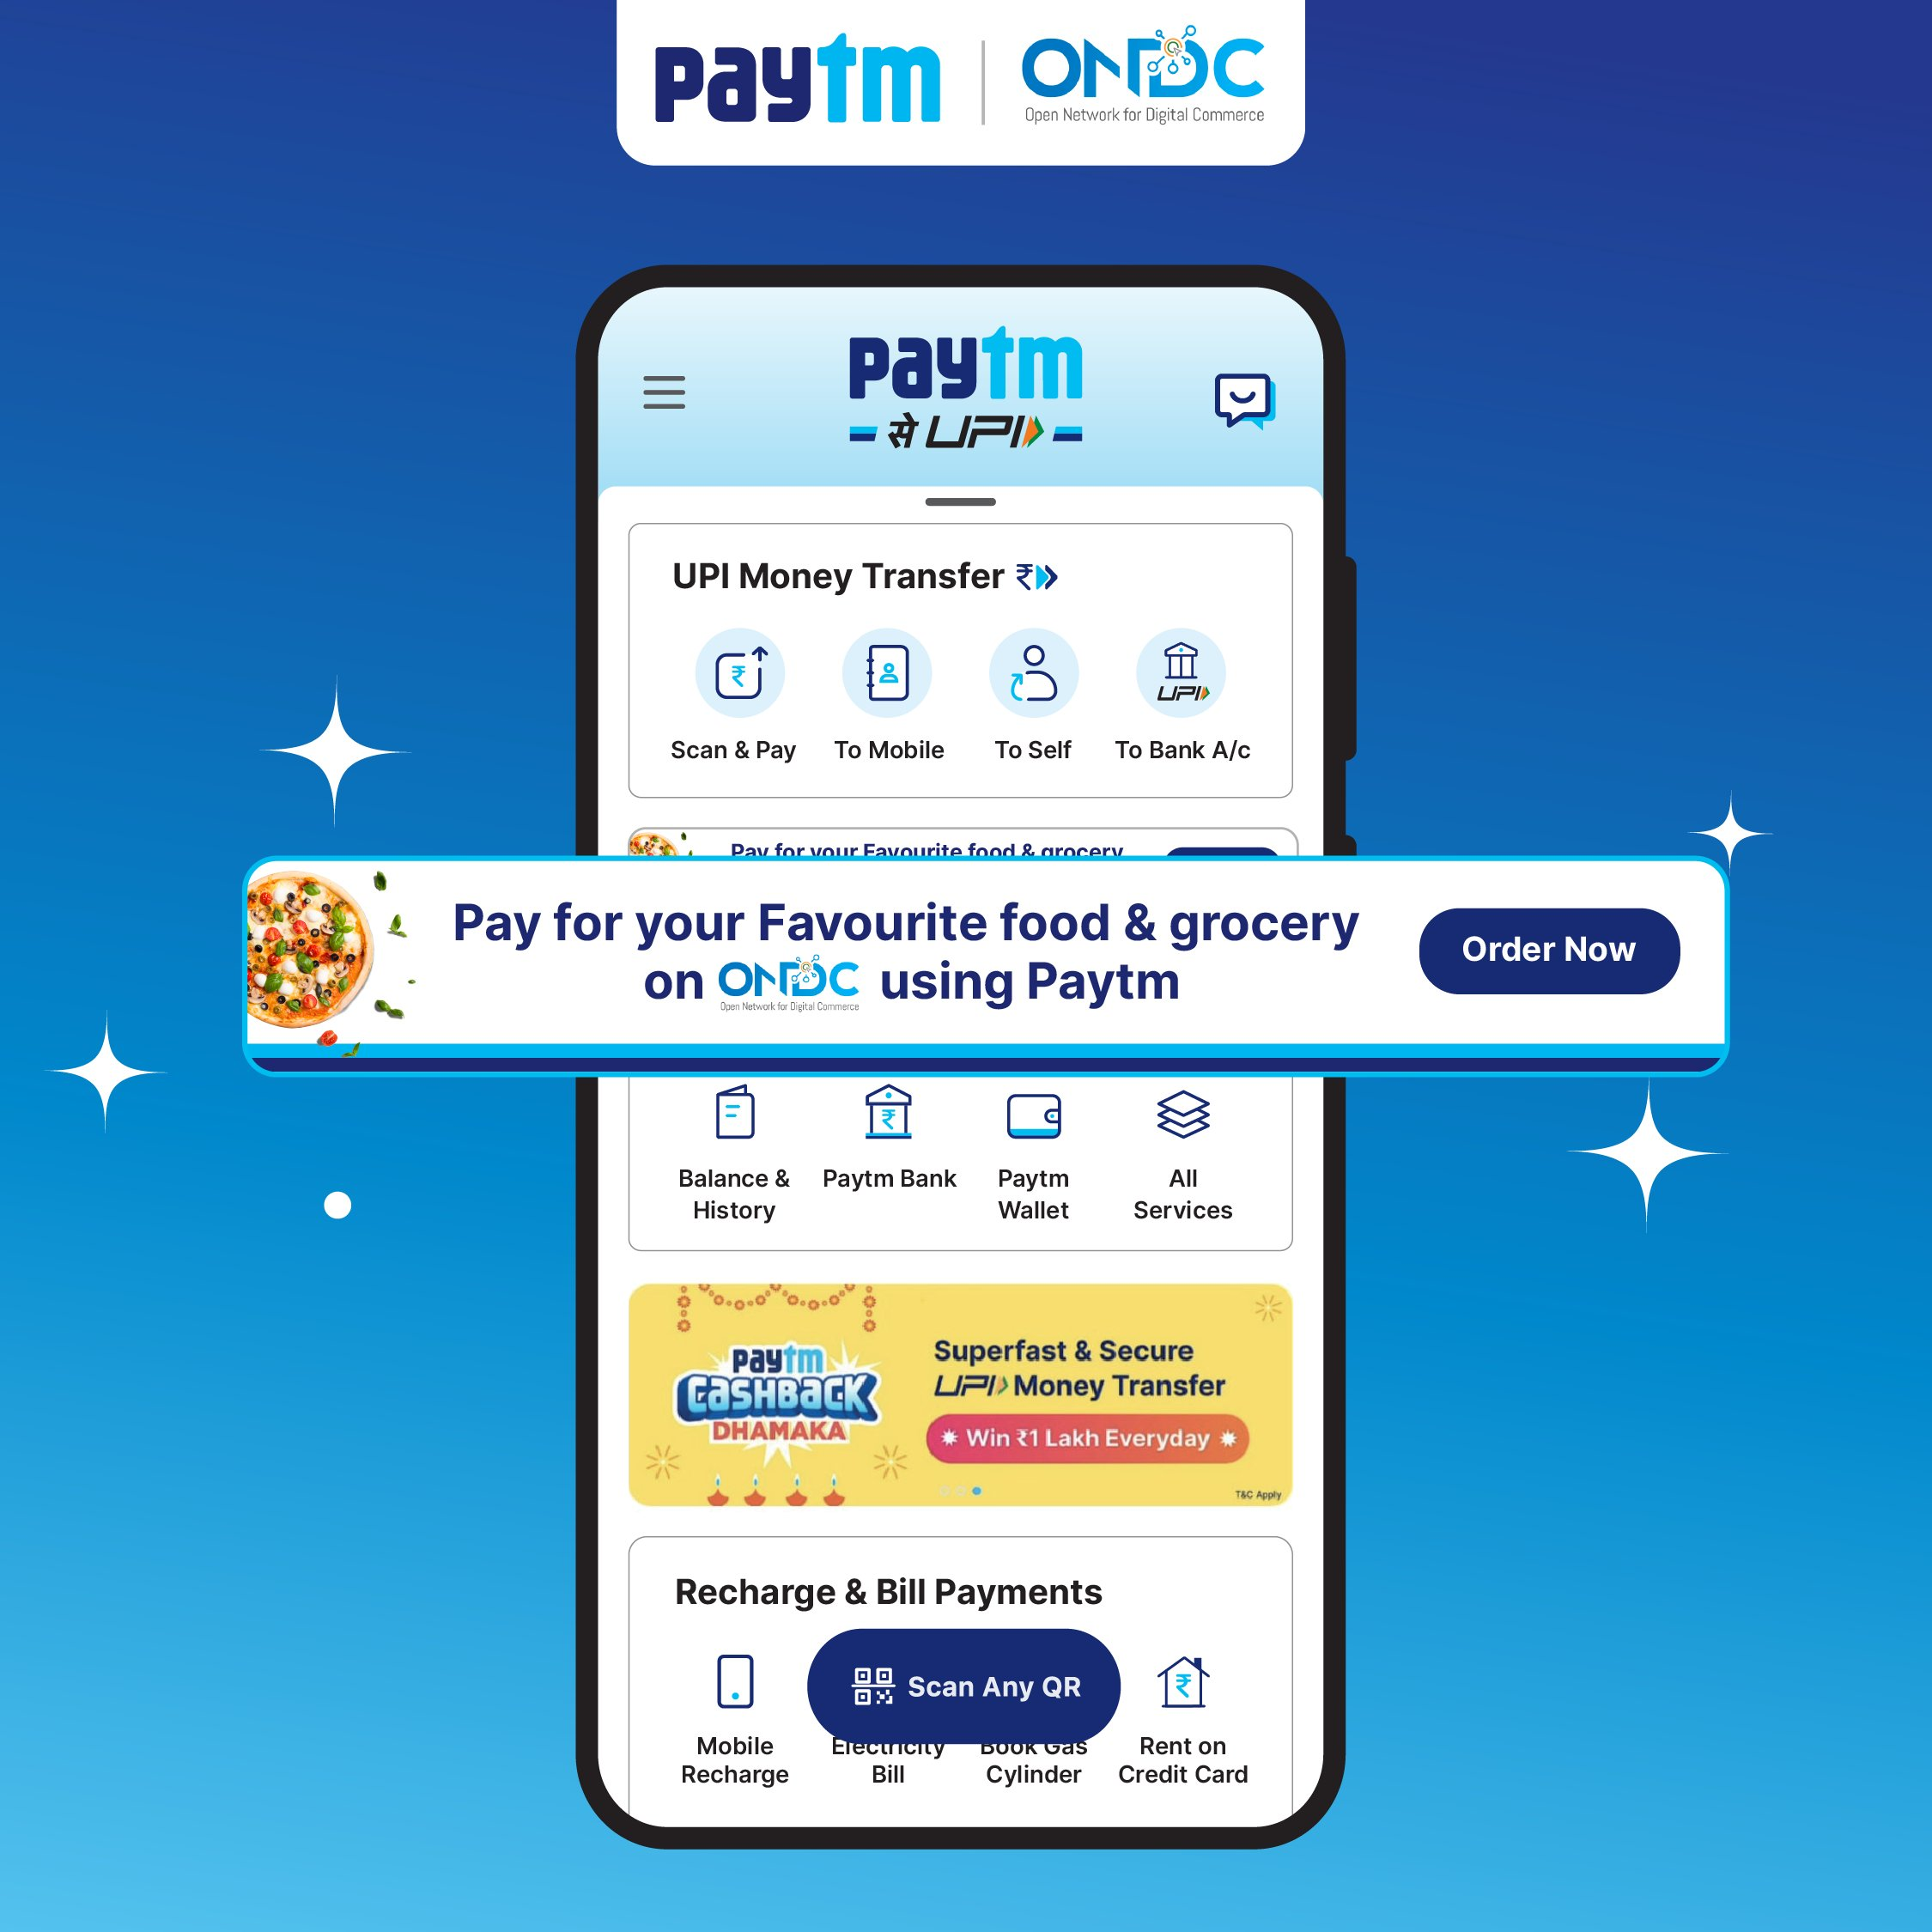 Ordering food and grocery on ONDC through Paytm